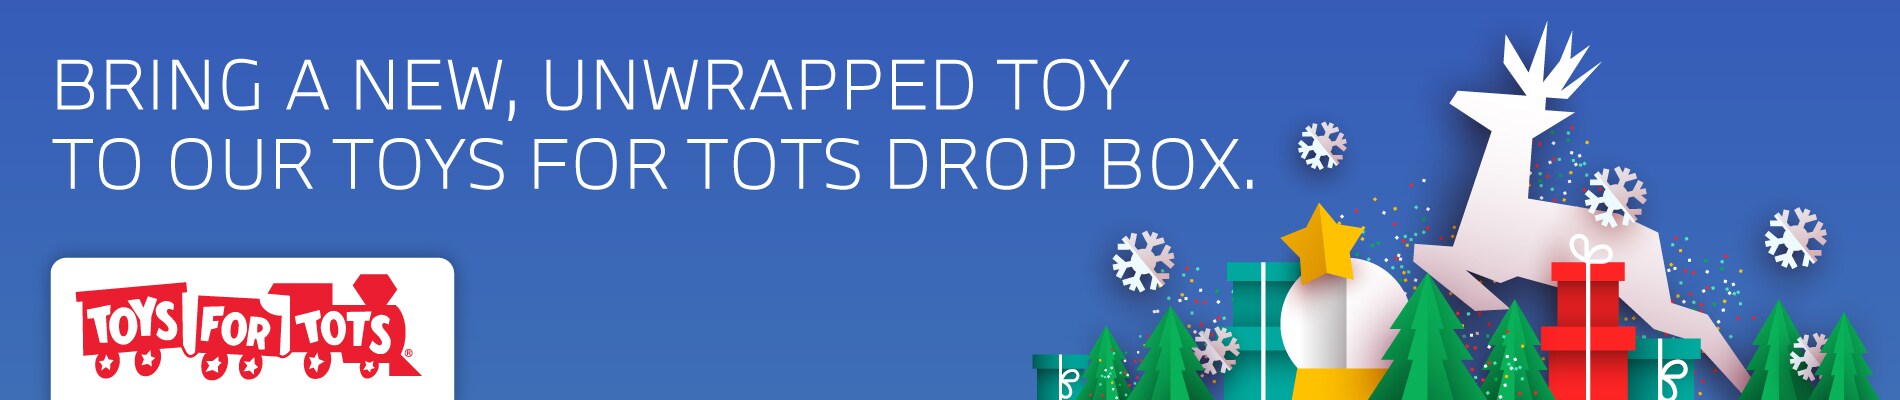 Bring a new, unwrapped toy to our toys for tots drop box.